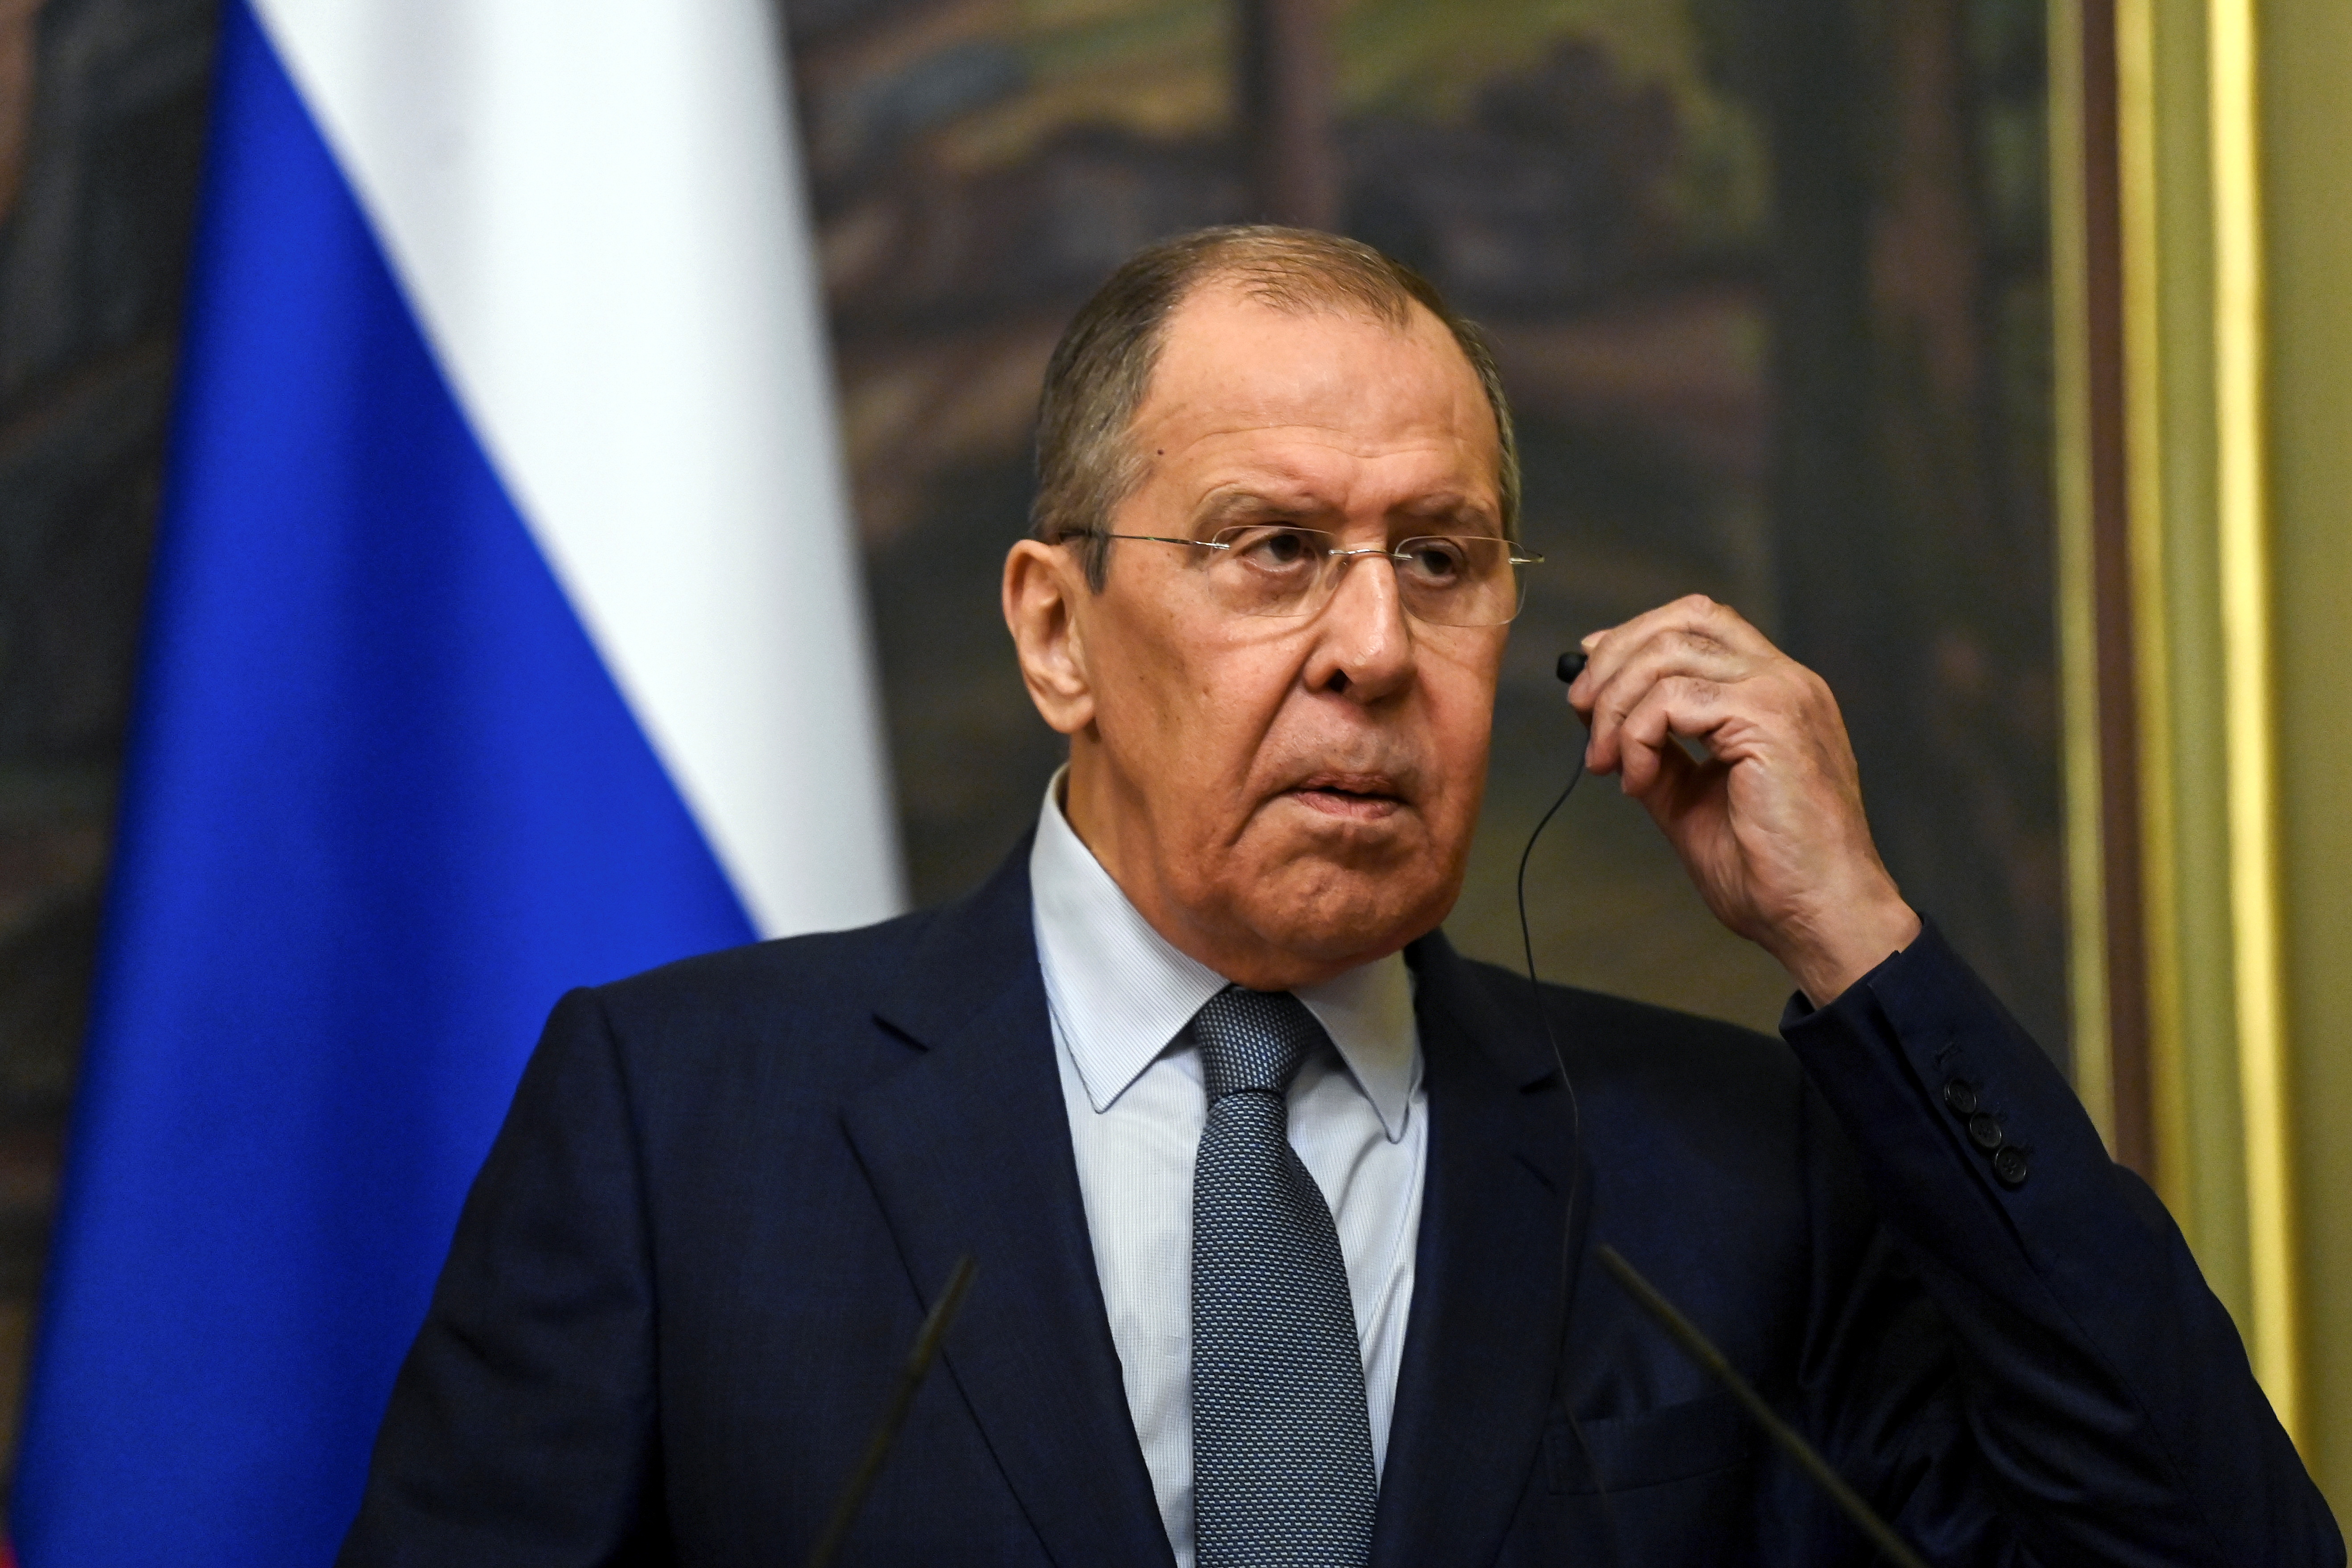 Russian Foreign Minister Sergei Lavrov attends a joint news conference with his Iranian counterpart Hossein Amir-Abdollahian following their meeting, in Moscow, Russia, October 6, 2021. Kirill Kudryavtsev/Pool via REUTERS